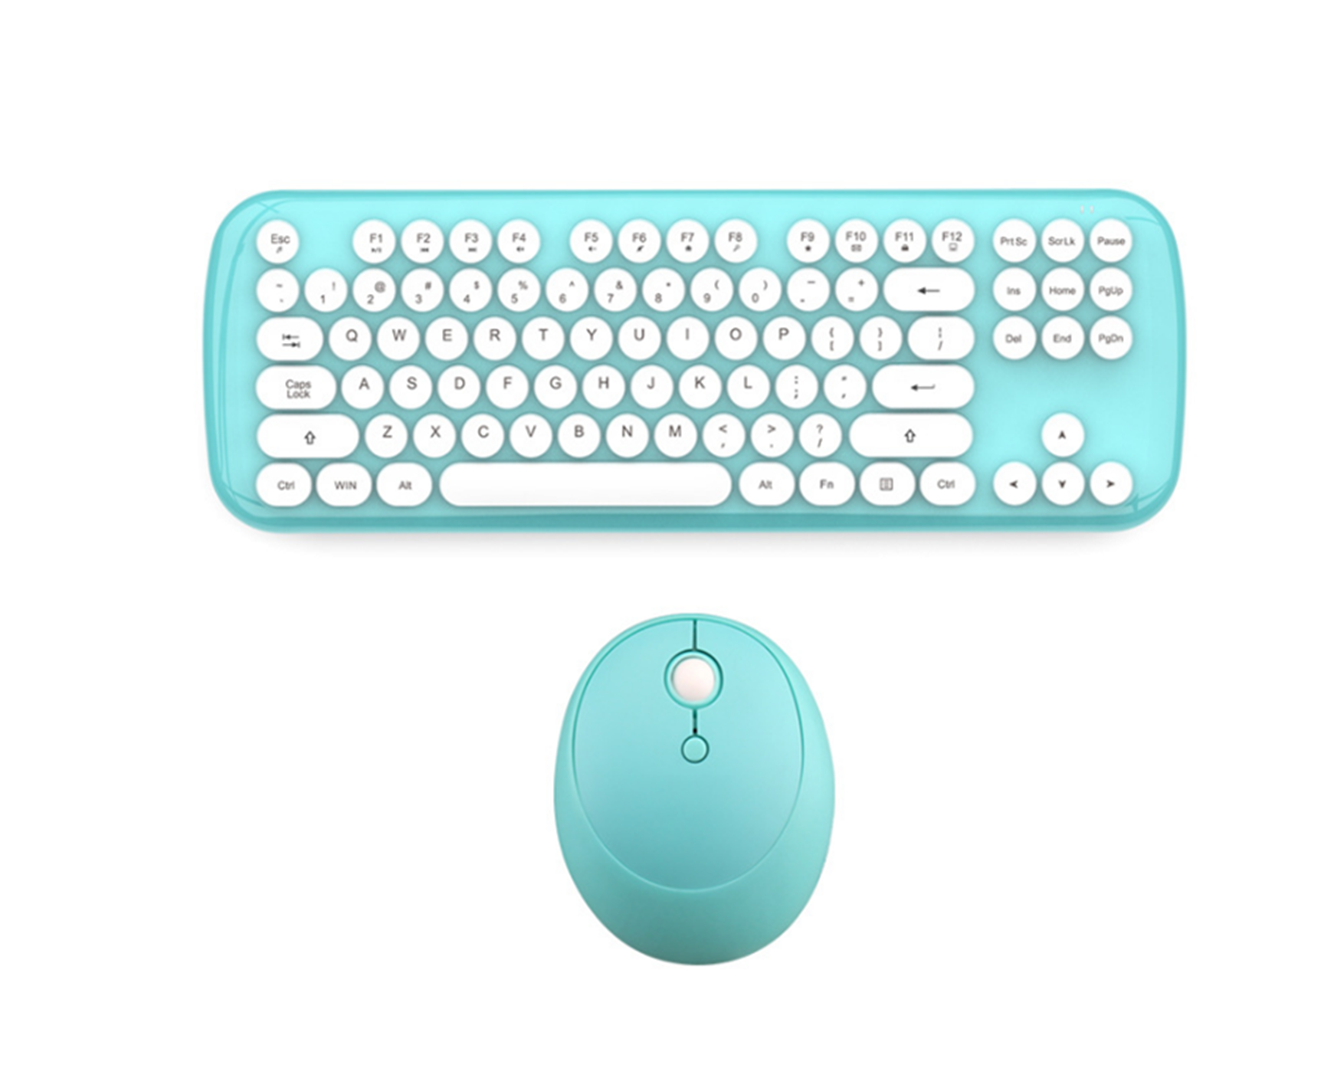 Mini Wireless Keyboard And Mouse Set Round Bluetooth Keyboard And Mouse - Blue